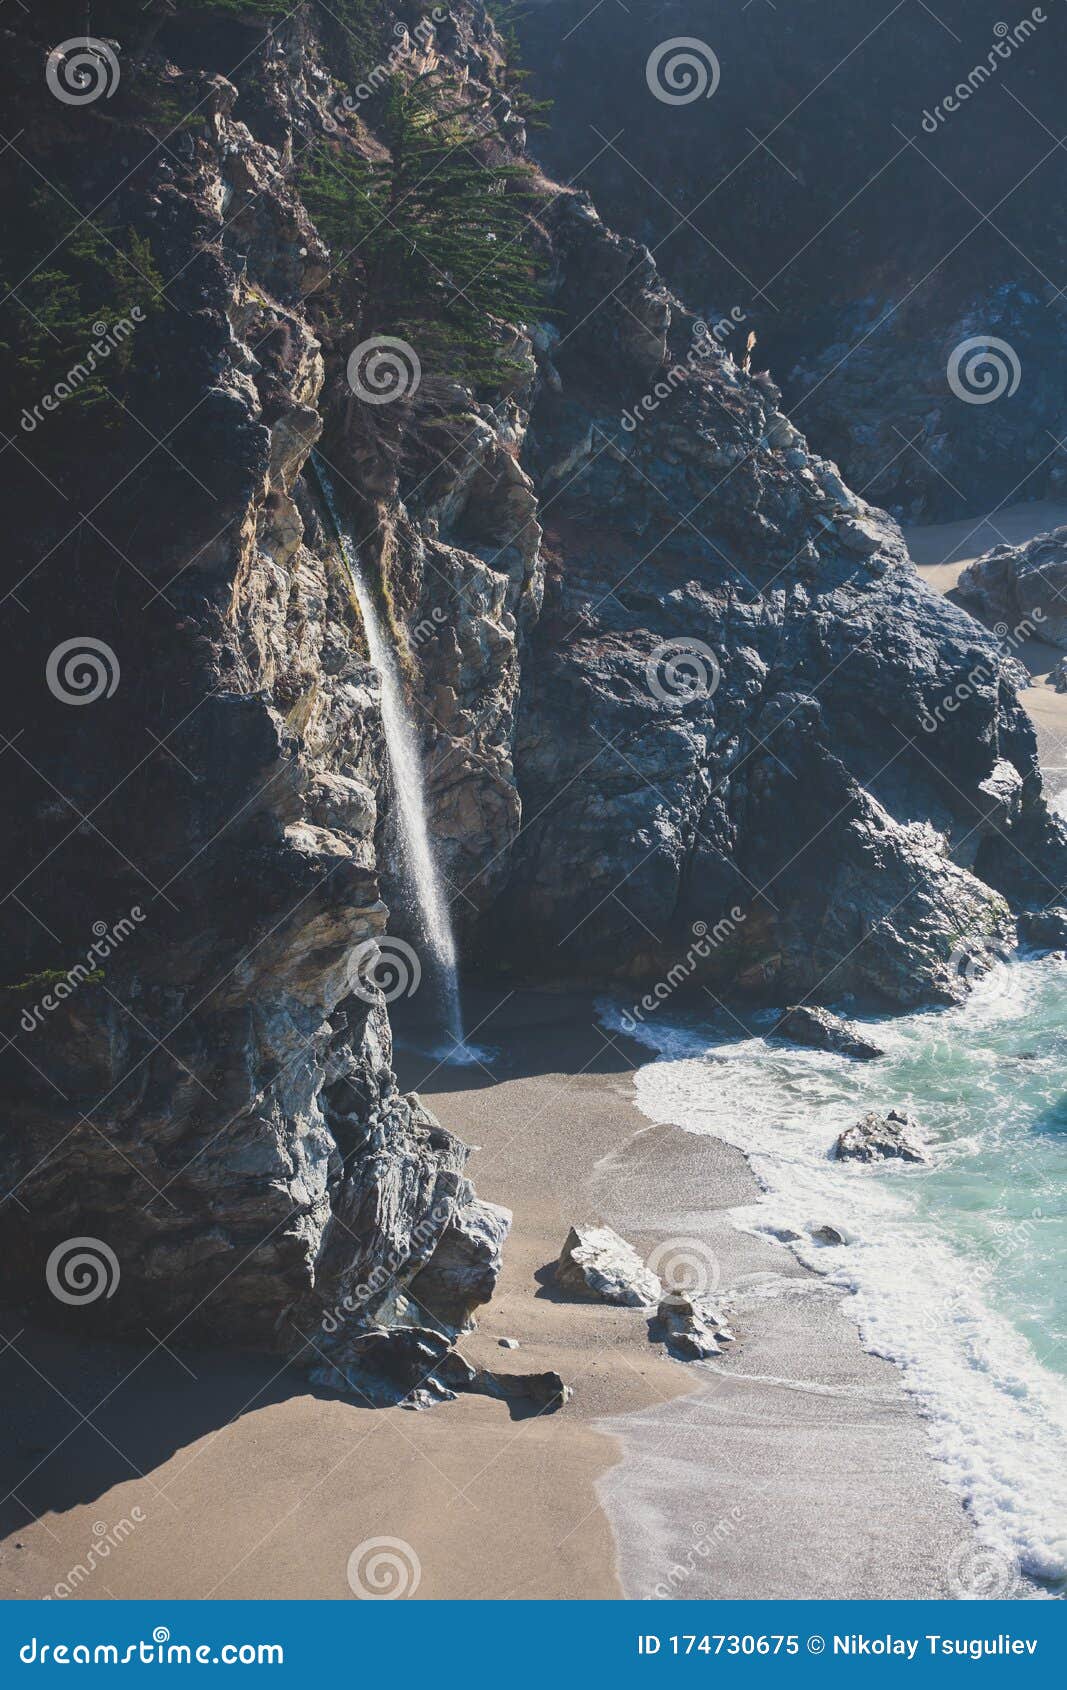 beautiful aerial view of mcway falls with julia pfeiffer beach and pacific ocean, big sur, monterey county, california, united